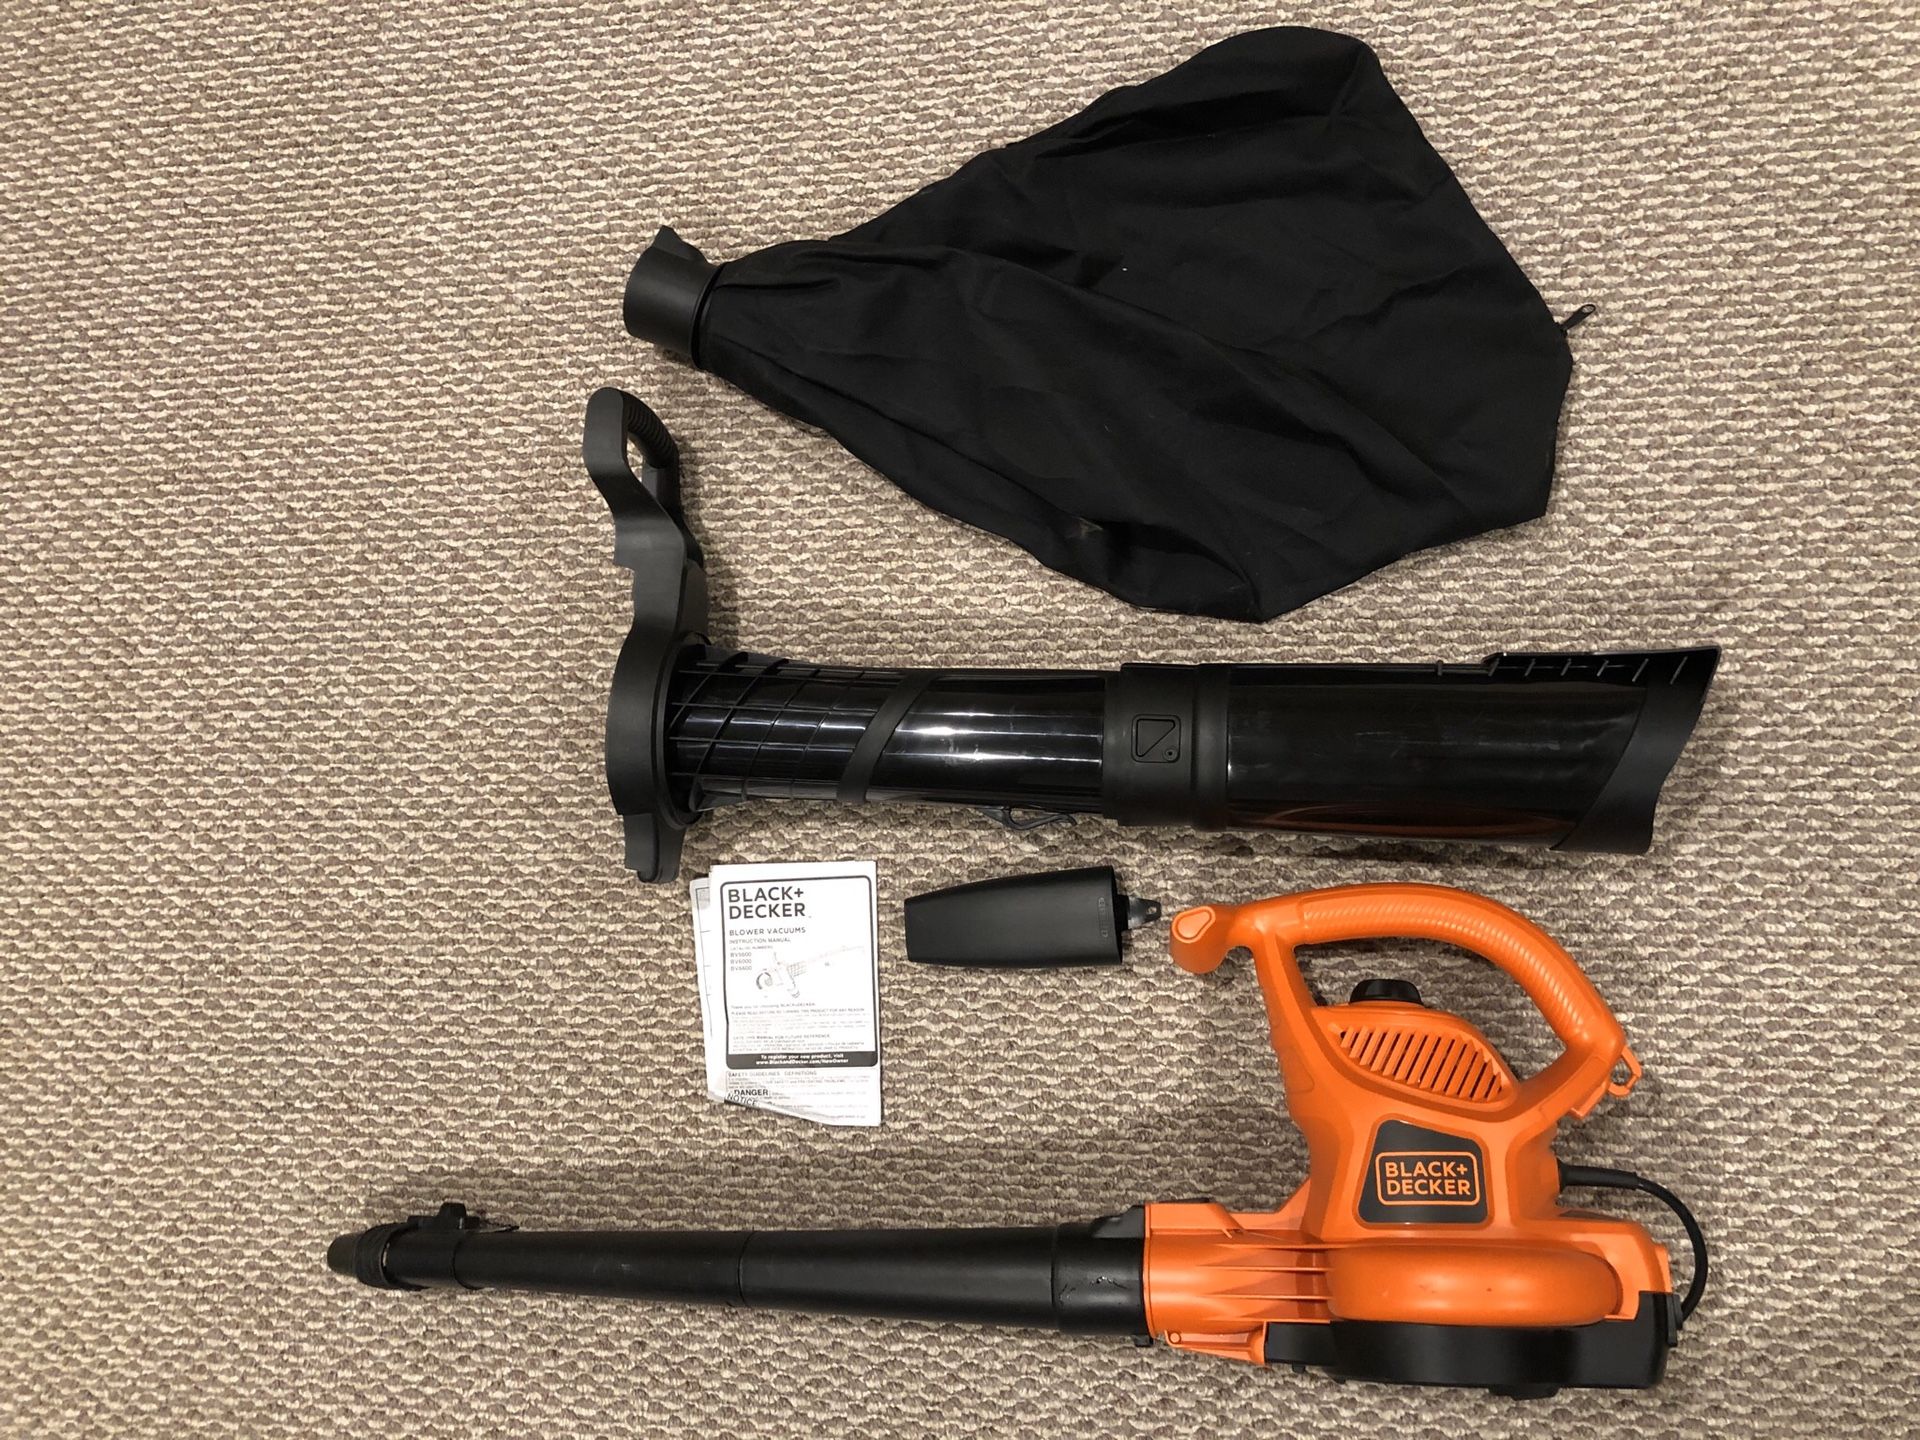 Leaf blower (almost never used) with vac/mulcher Black and Decker